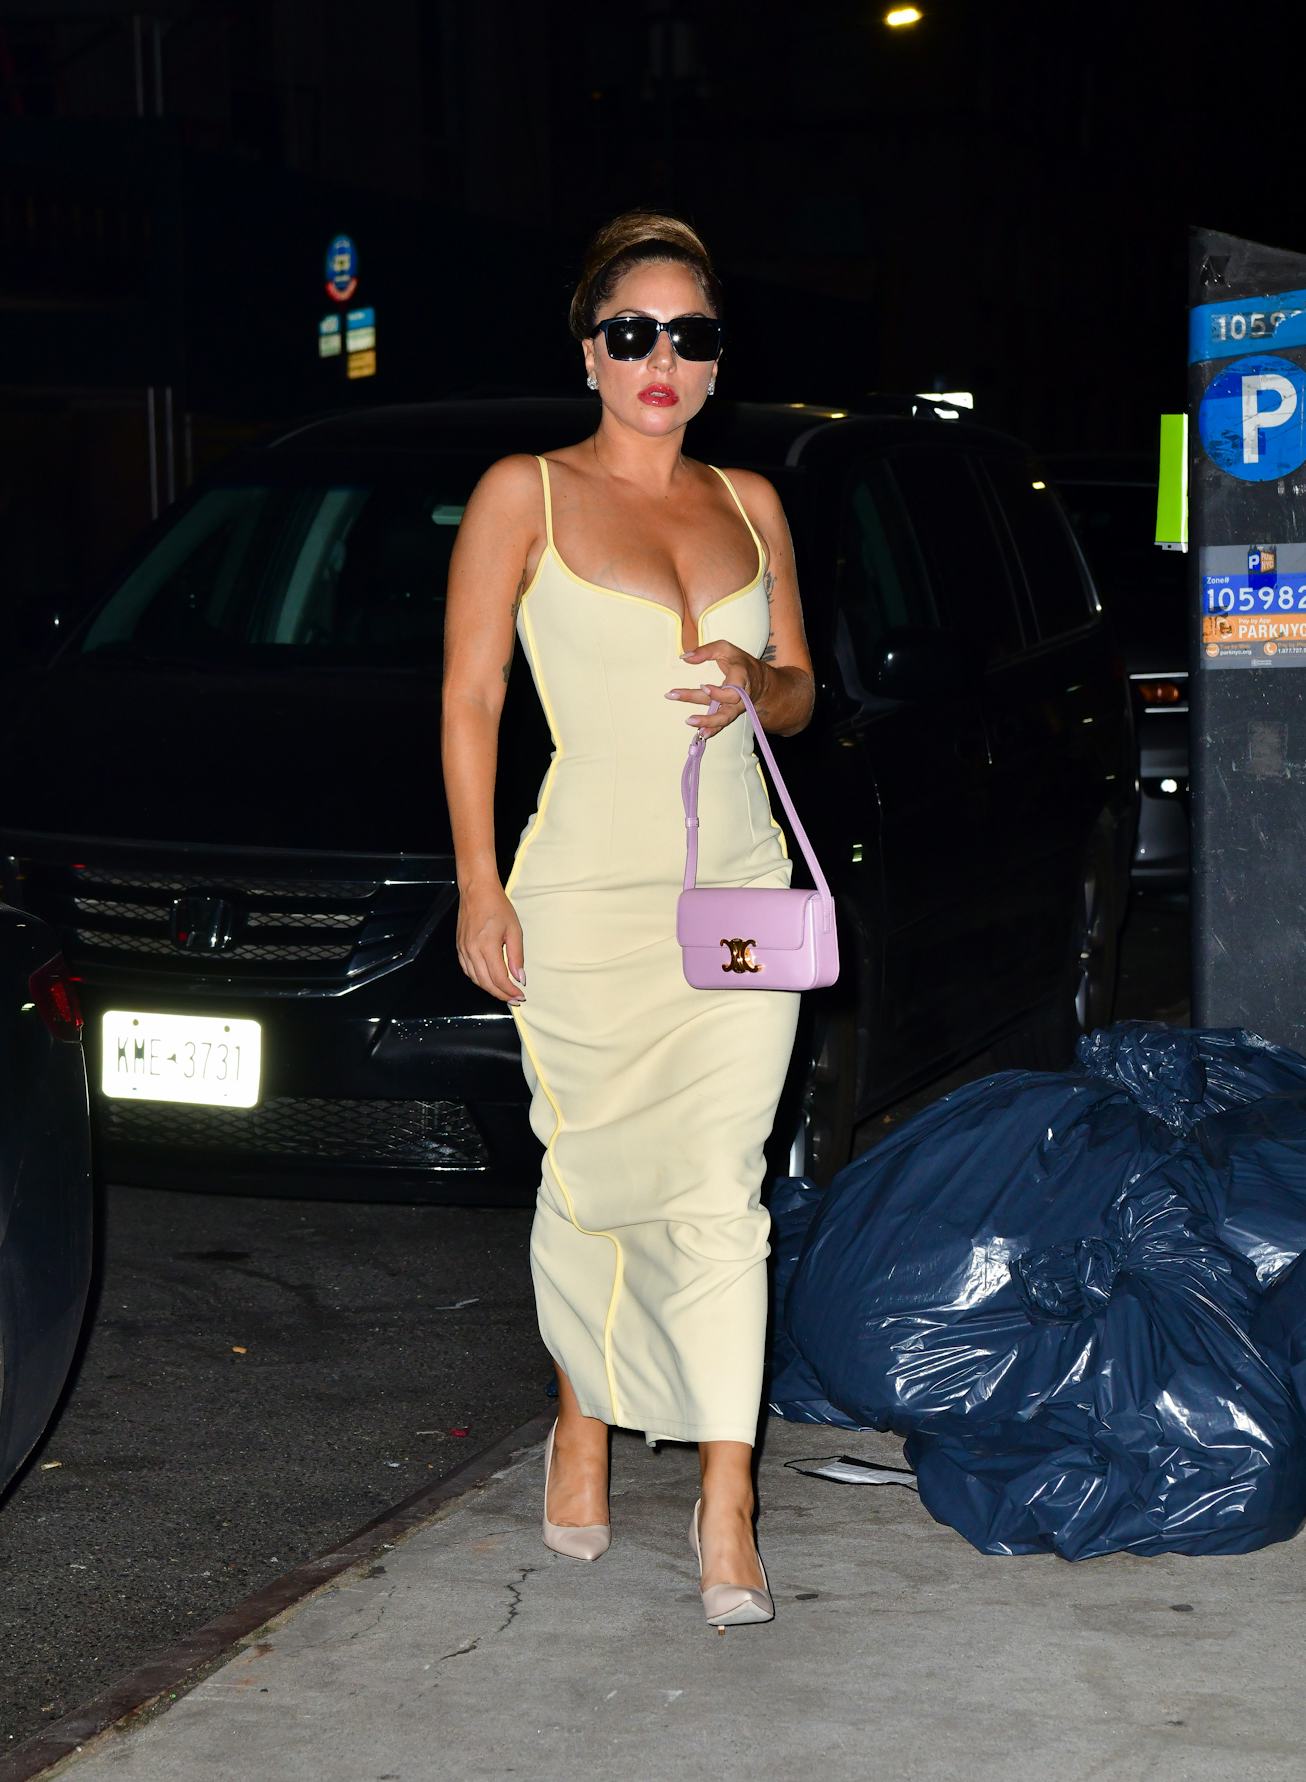 NEW YORK, NEW YORK - AUGUST 07:  (EXCLUSIVE COVERAGE) Lady Gaga seen on the streets of Manhattan on ...